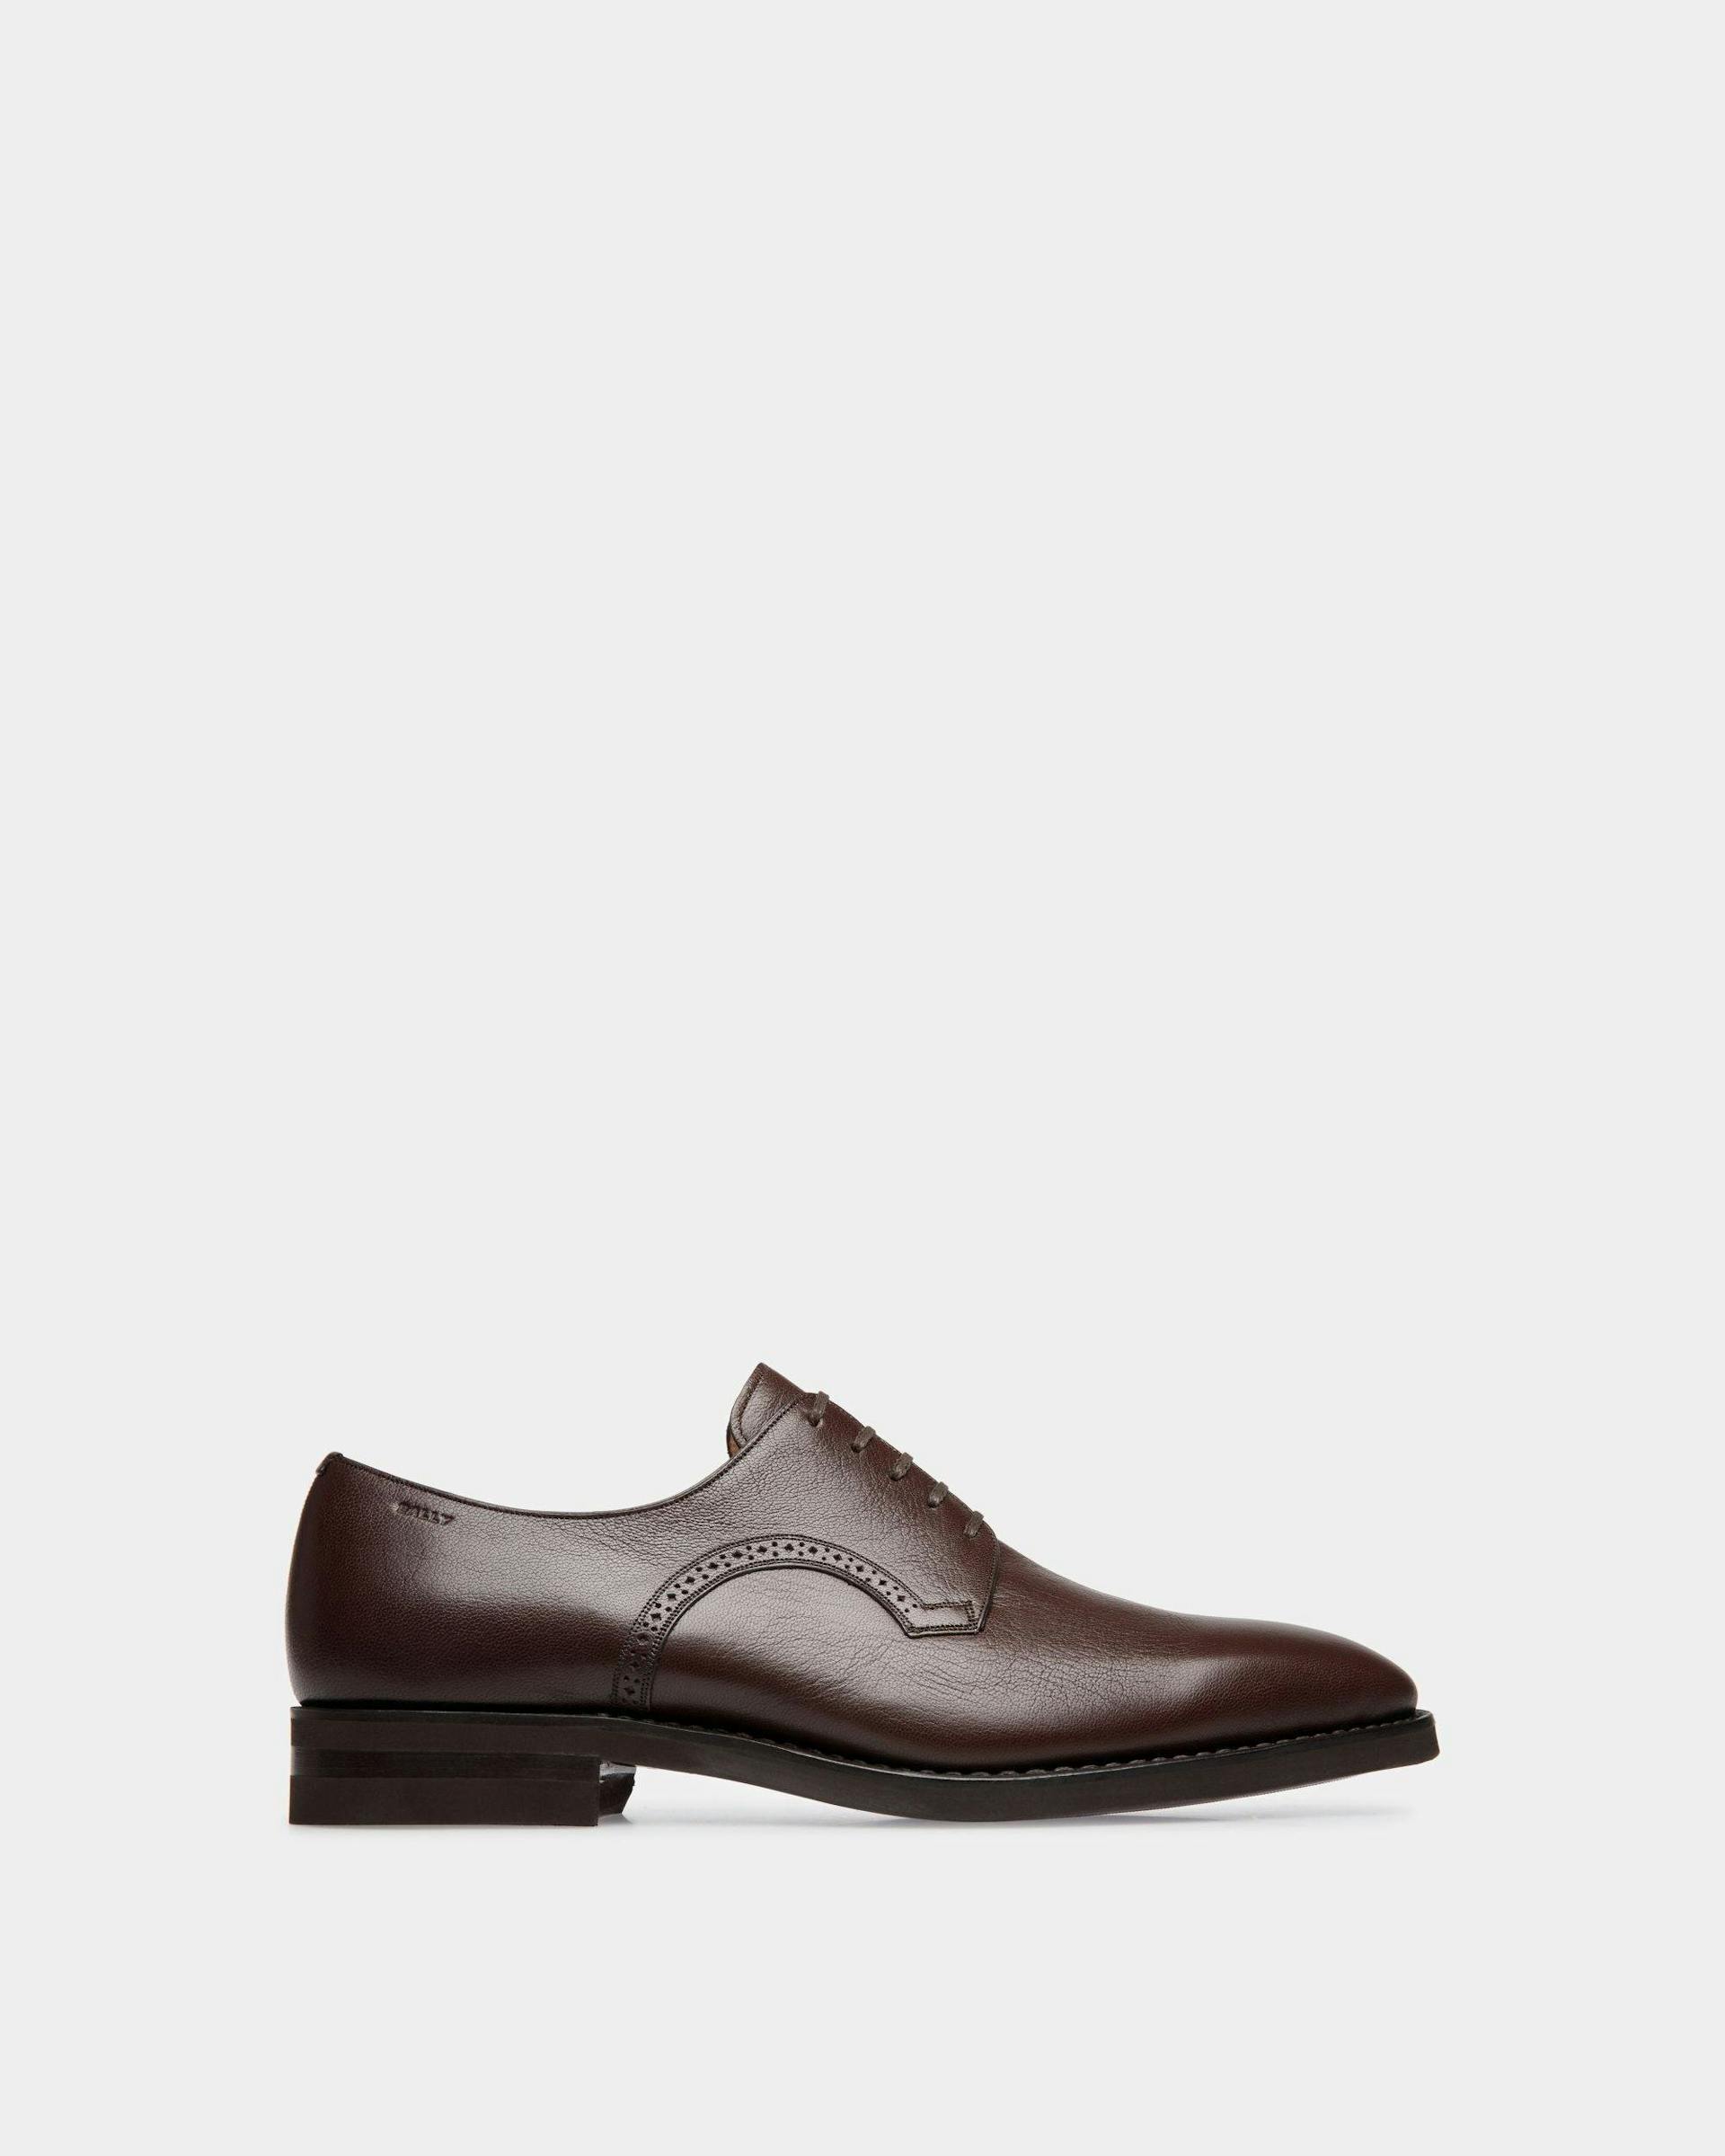 Men's Scribe Derby in Brown Grained Leather | Bally | Still Life Side